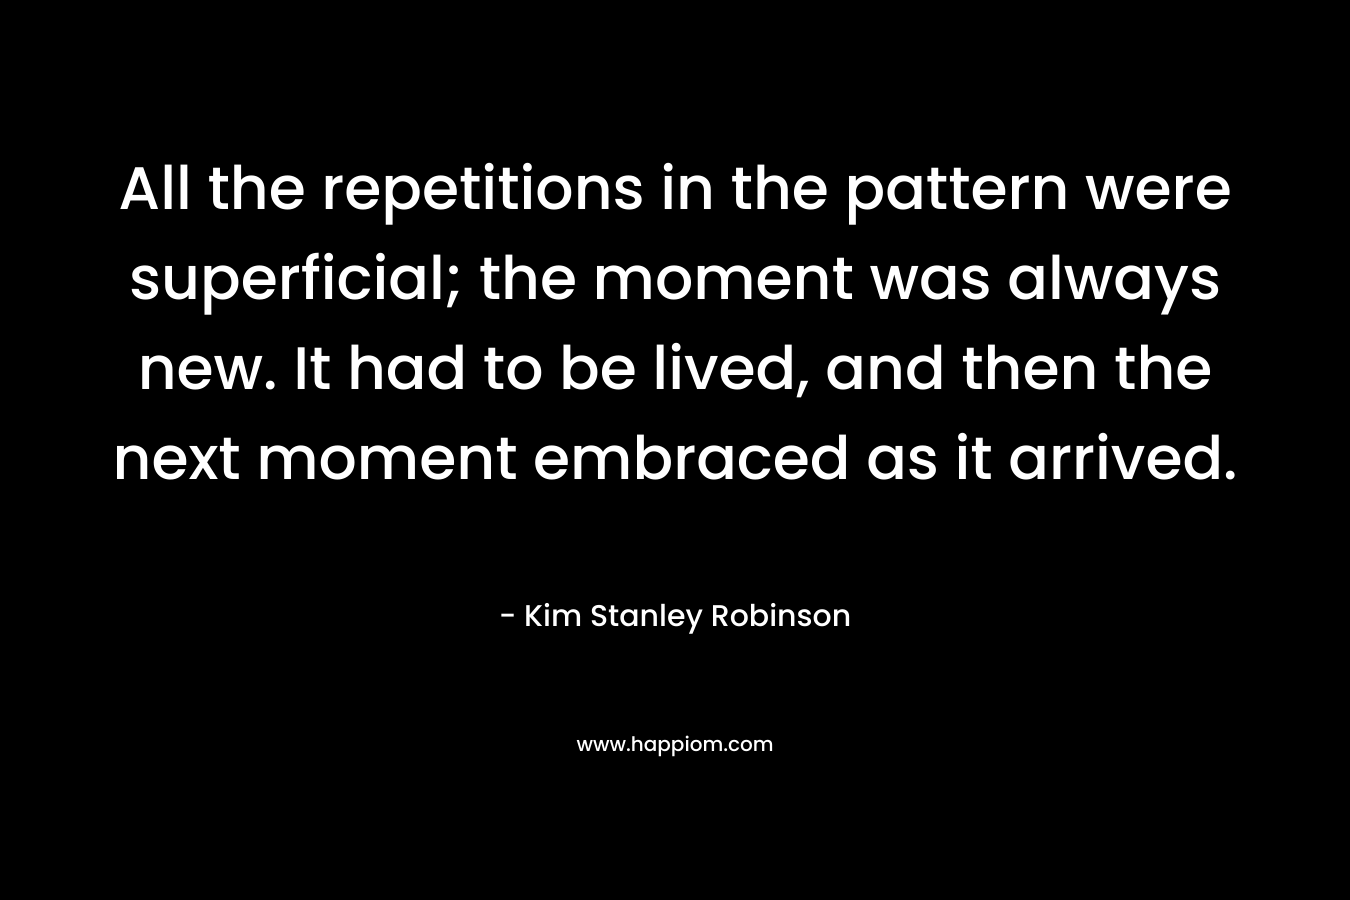 All the repetitions in the pattern were superficial; the moment was always new. It had to be lived, and then the next moment embraced as it arrived. – Kim Stanley Robinson